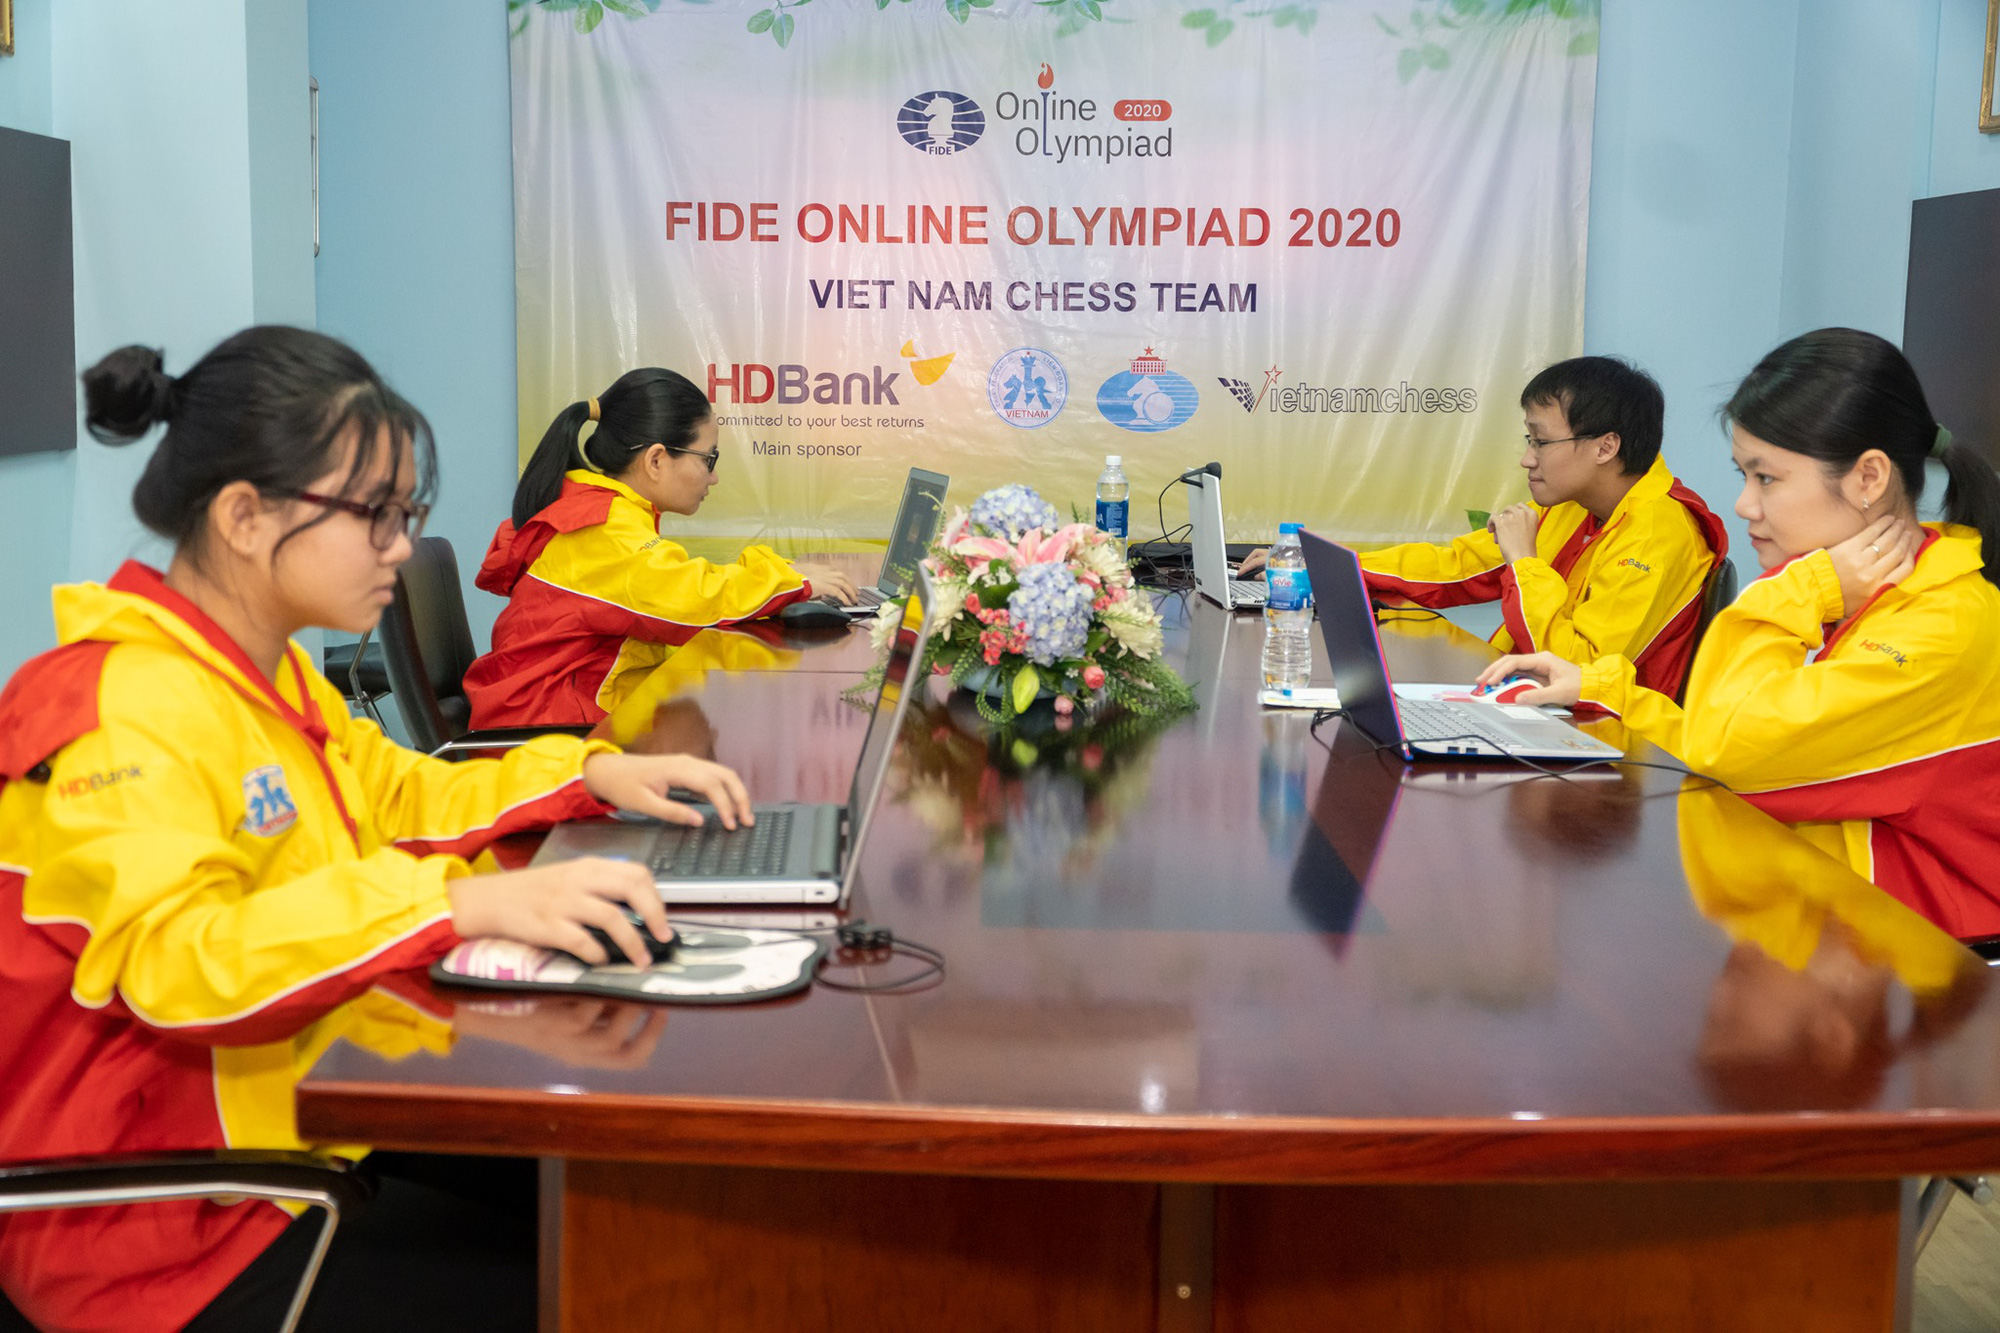 Vietnam eliminated early from online chess Olympiad 2020